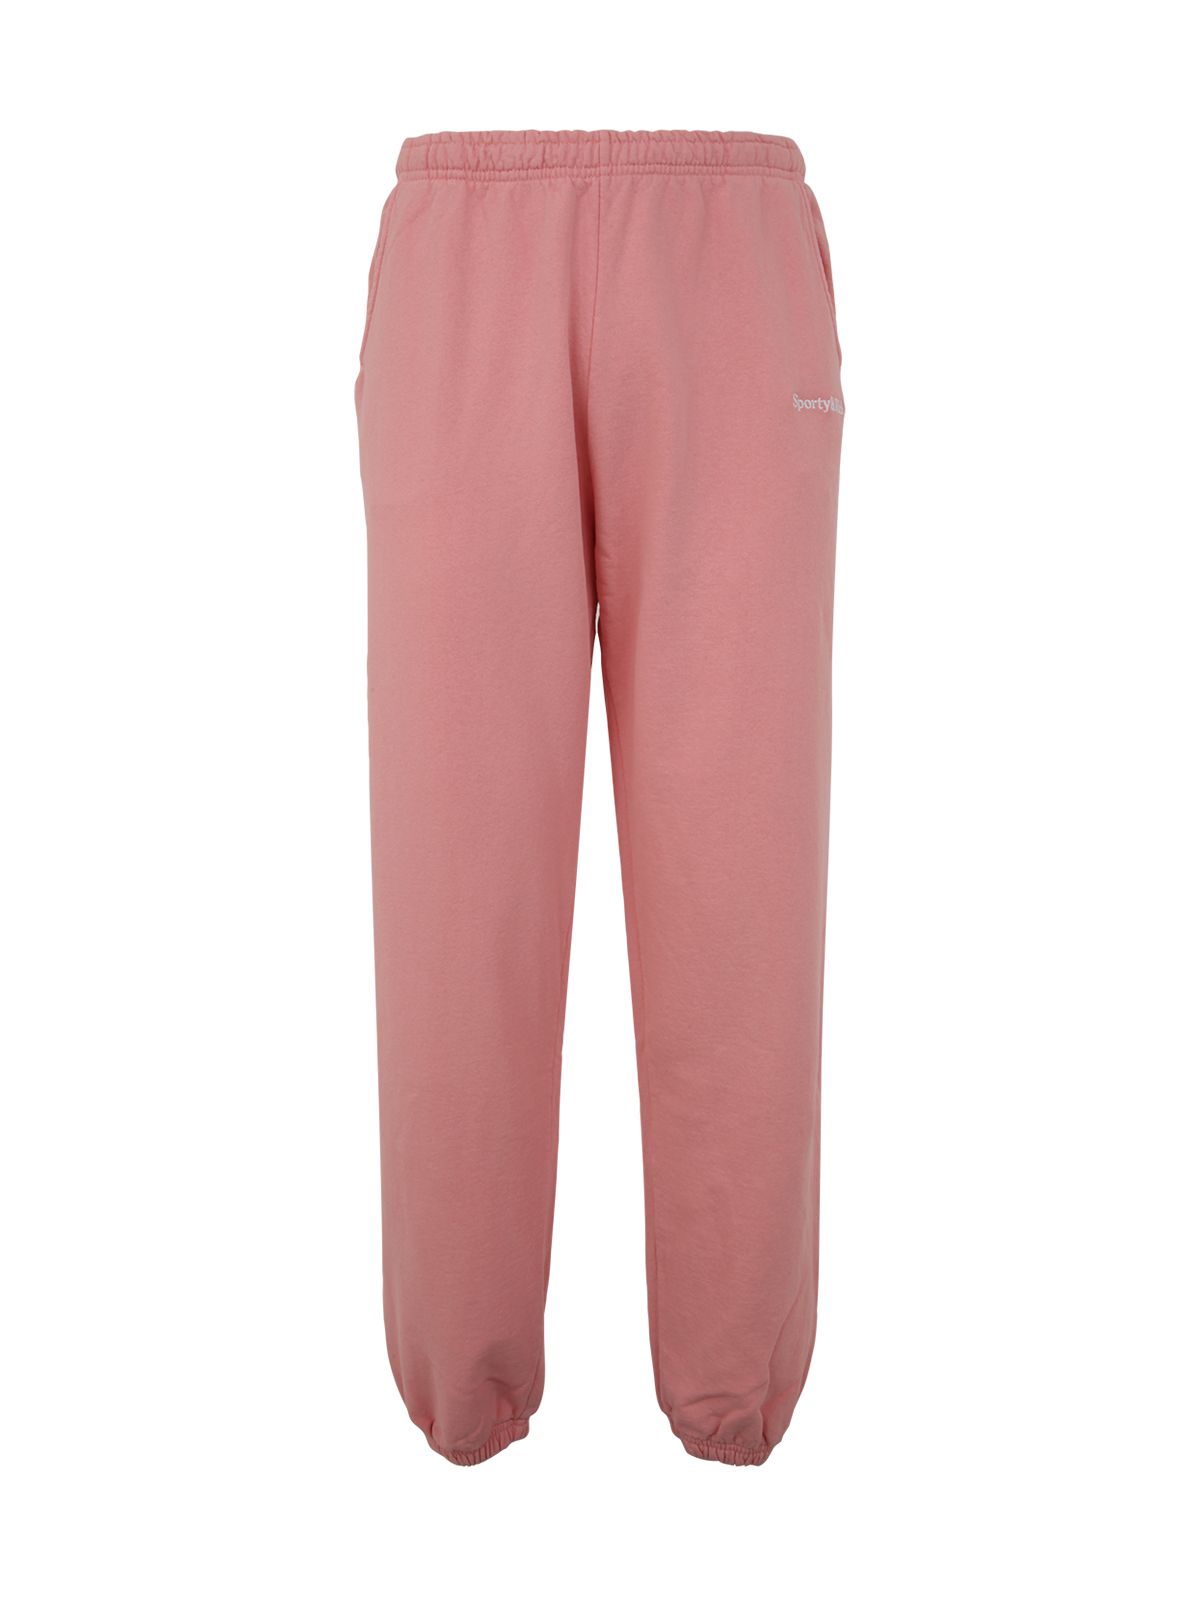 Shop Sporty &amp; Rich Serif Embroidered Sweatpant